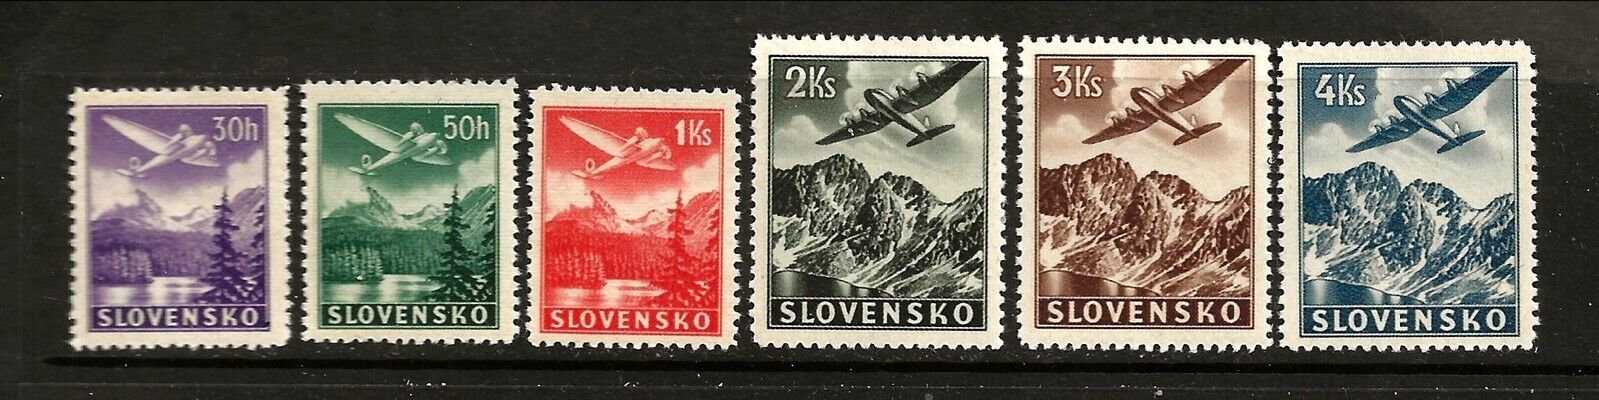 Slovakia Sc C1-C6 LH of 1939 -Air Post stamps - Airplanes